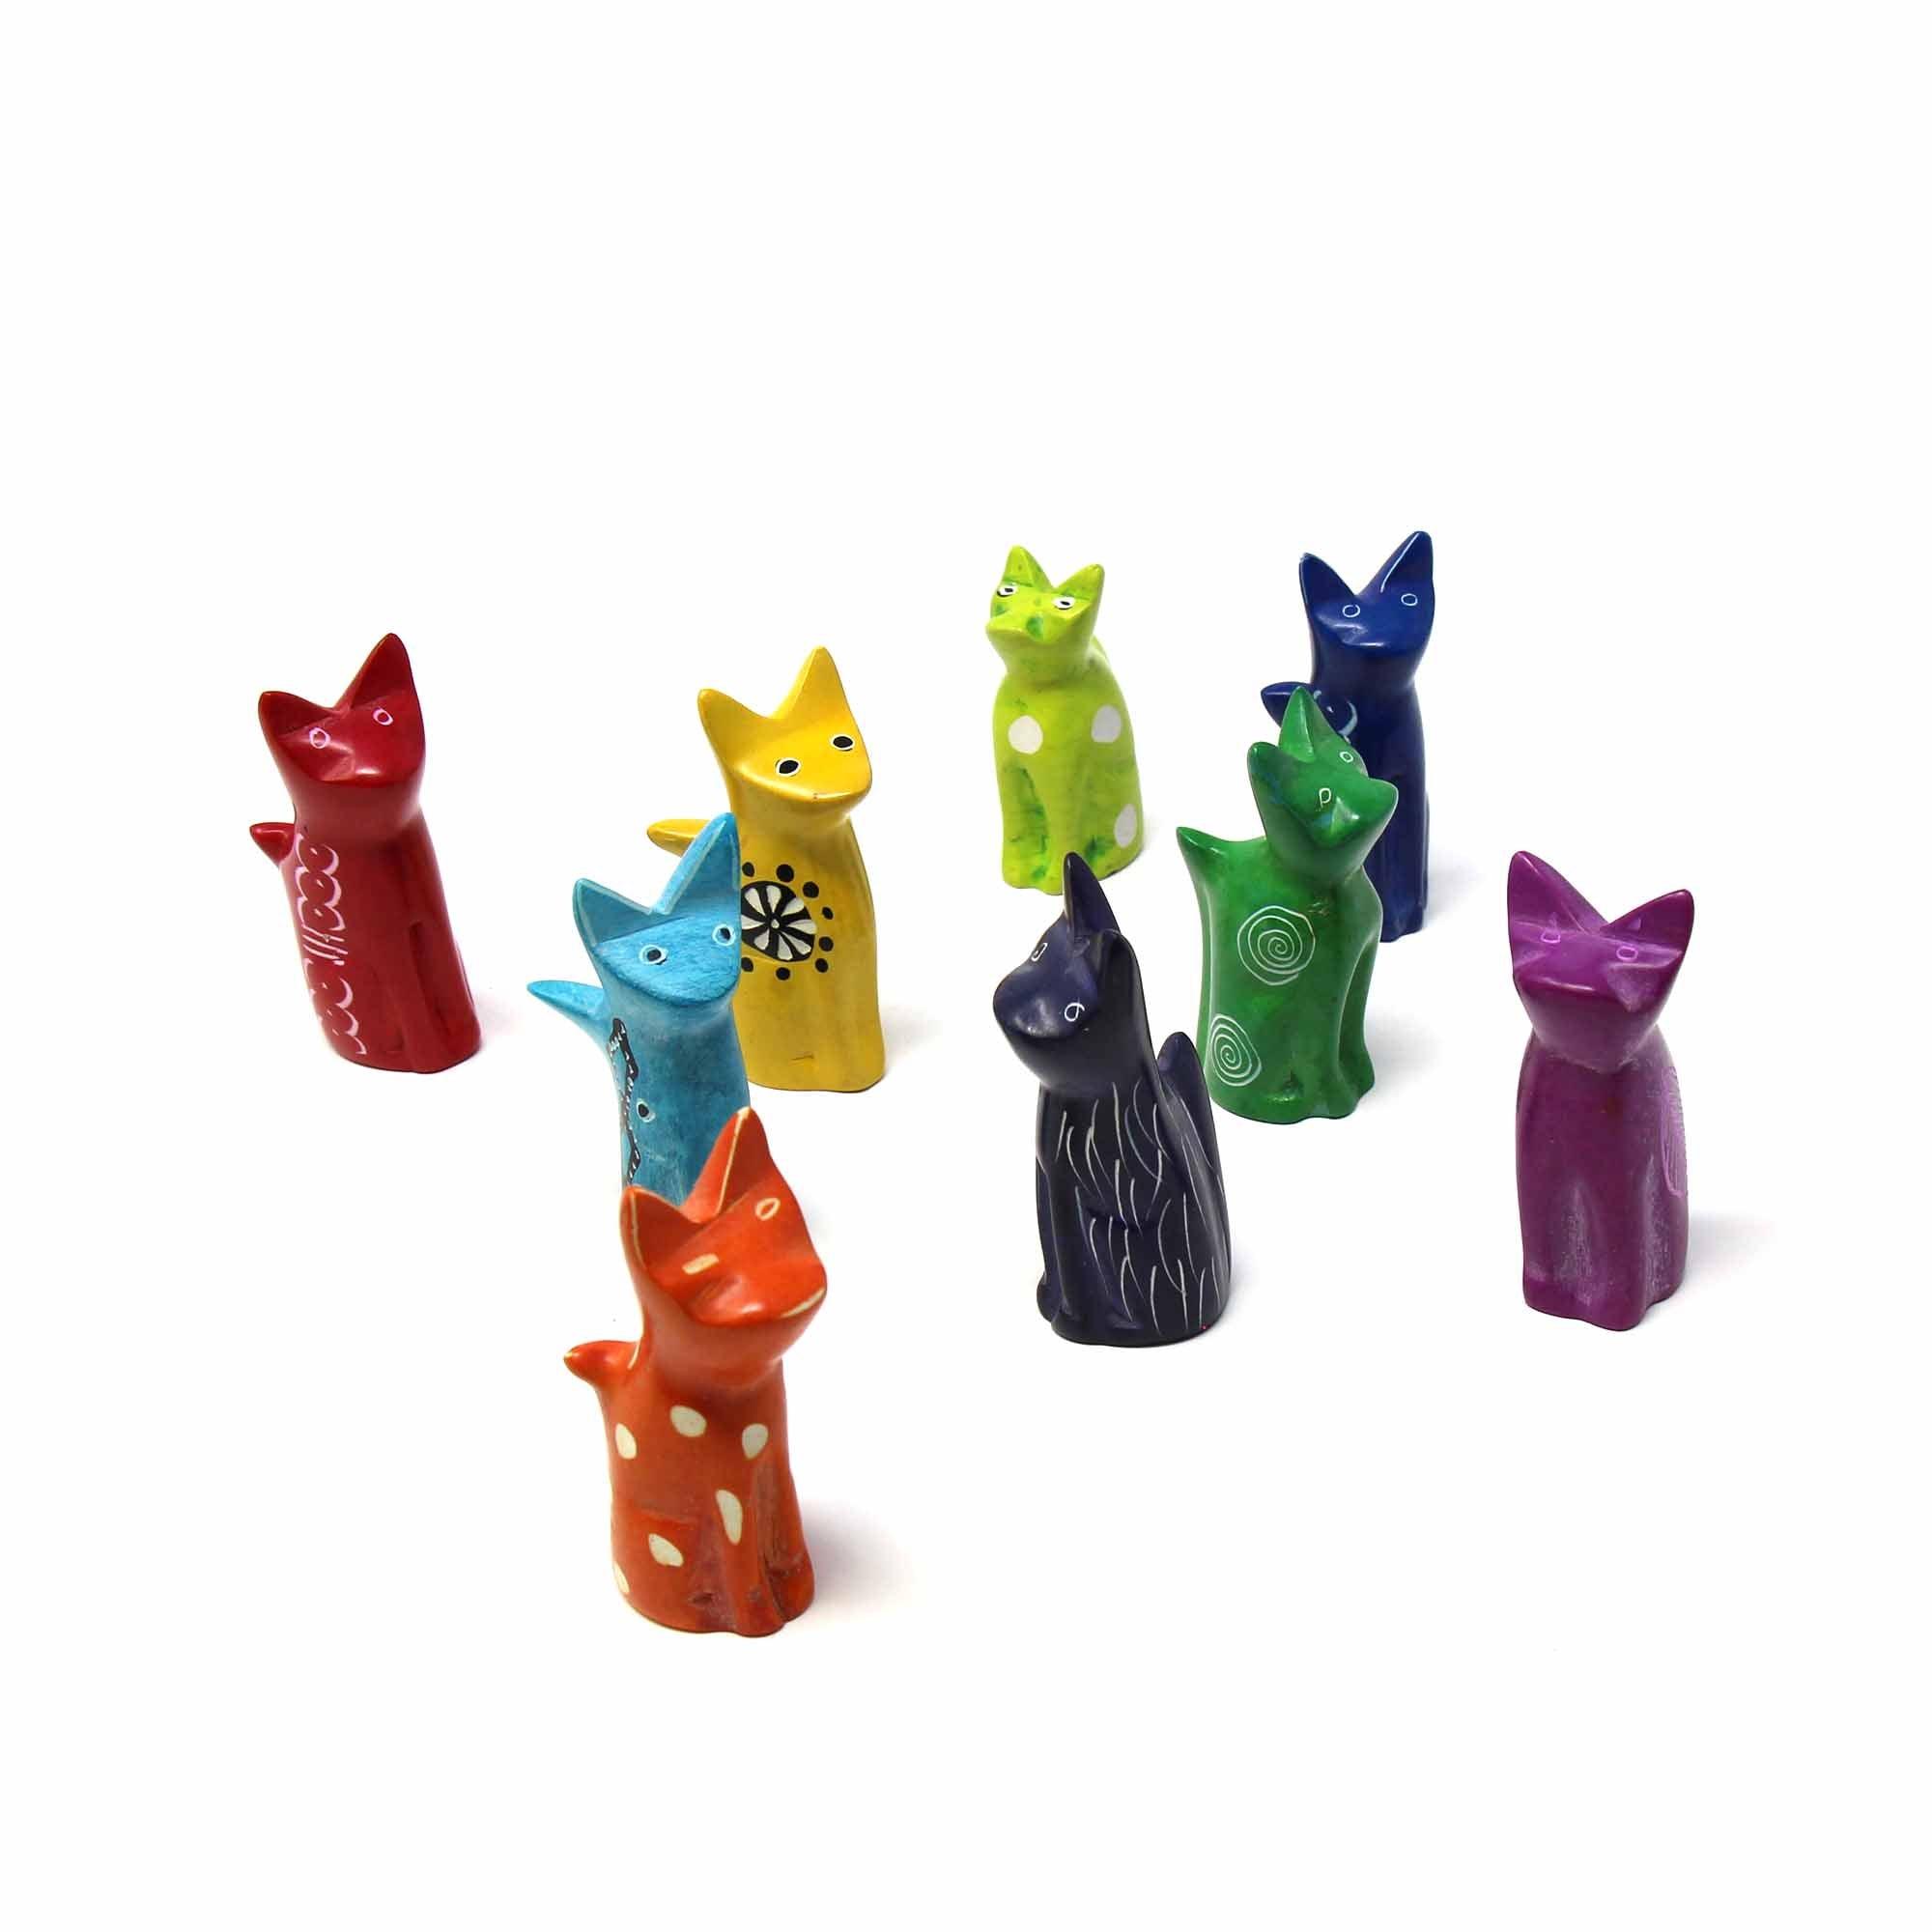 Soapstone Tiny Sitting Cats - Assorted Pack of 5 Colors - Flyclothing LLC